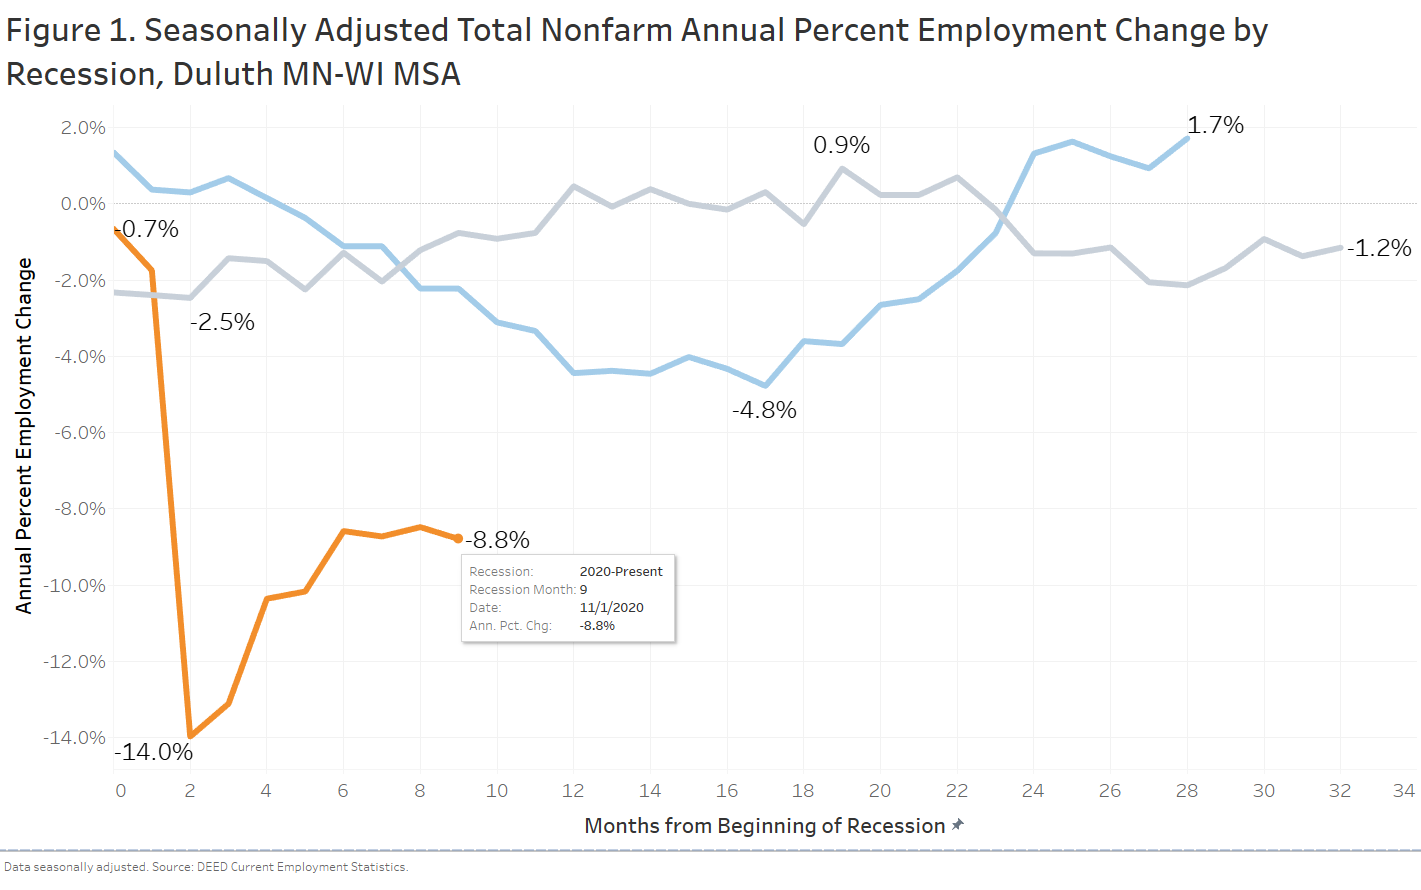 Figure 1: Seasonally Adjusted Total Nonfarm Annual Percent Employment Change by Recession, Duluth MN-WI MSA